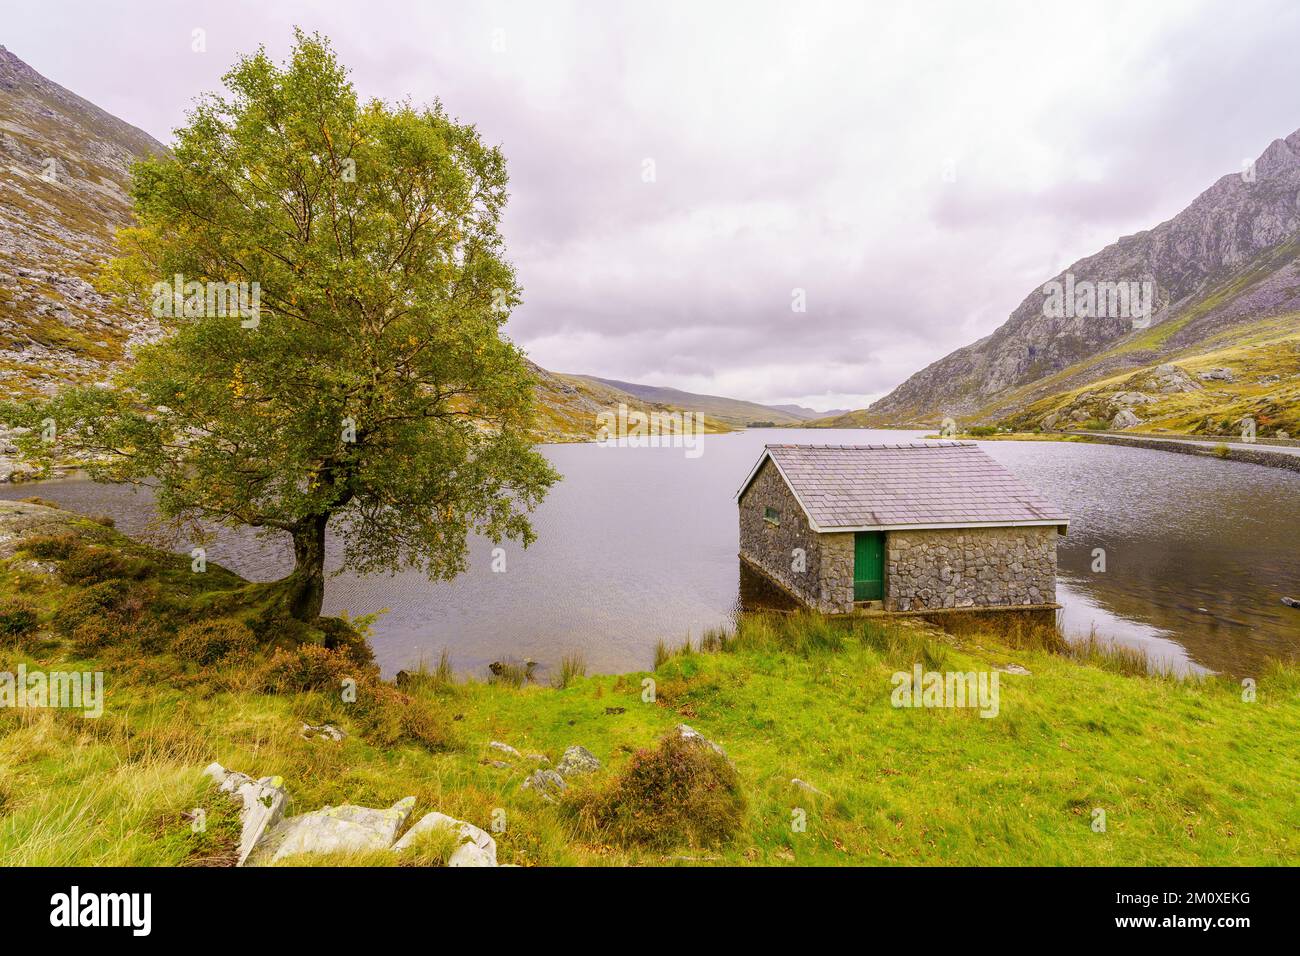 View of the Llyn Ogwen lake, in Snowdonia National Park, the North of Wales, UK Stock Photo